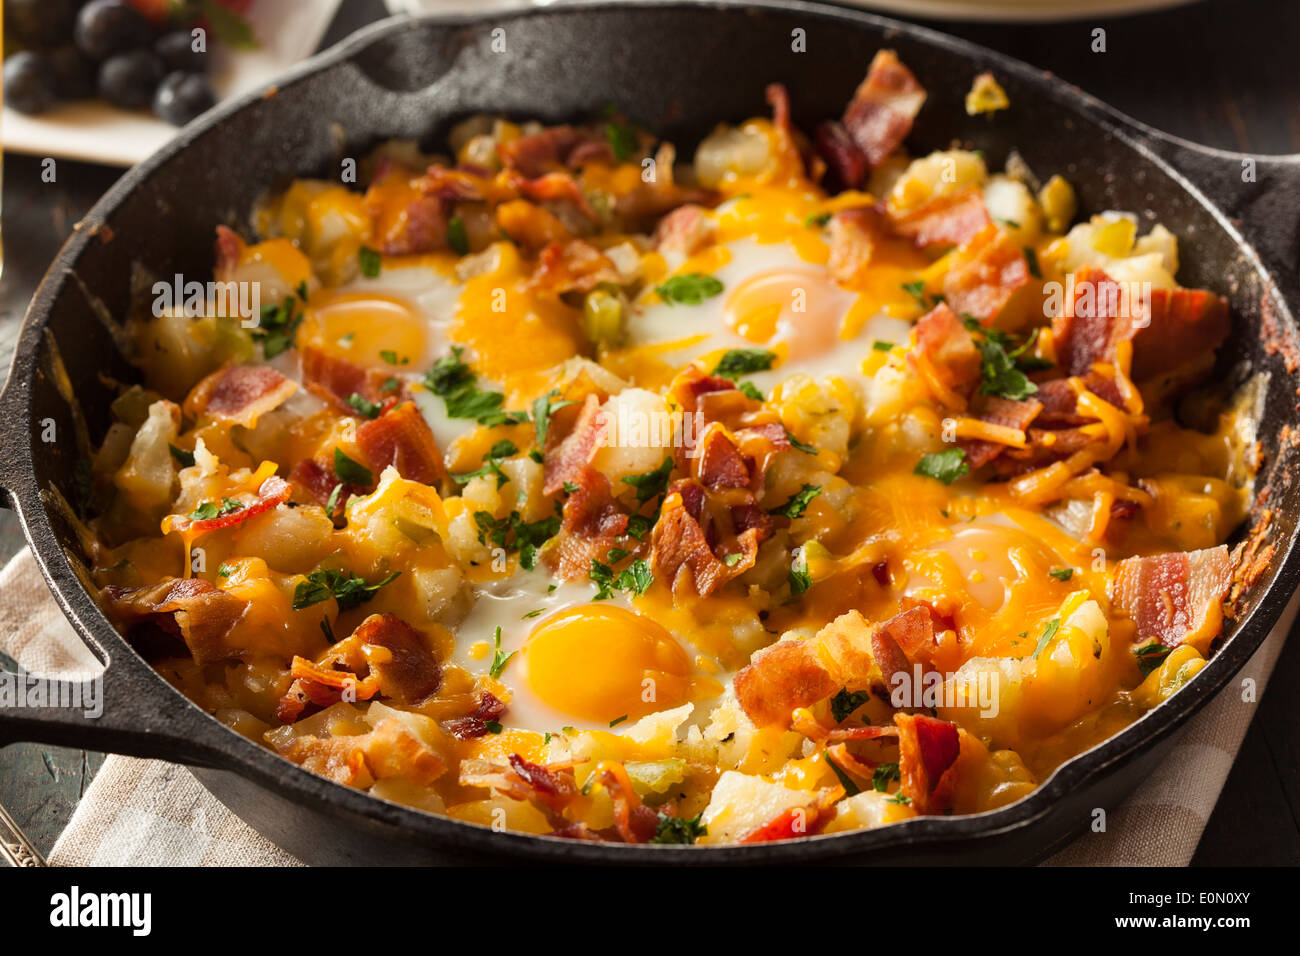 https://c8.alamy.com/comp/E0N0XY/homemade-hearty-breakfast-skillet-with-eggs-potatoes-and-bacon-E0N0XY.jpg